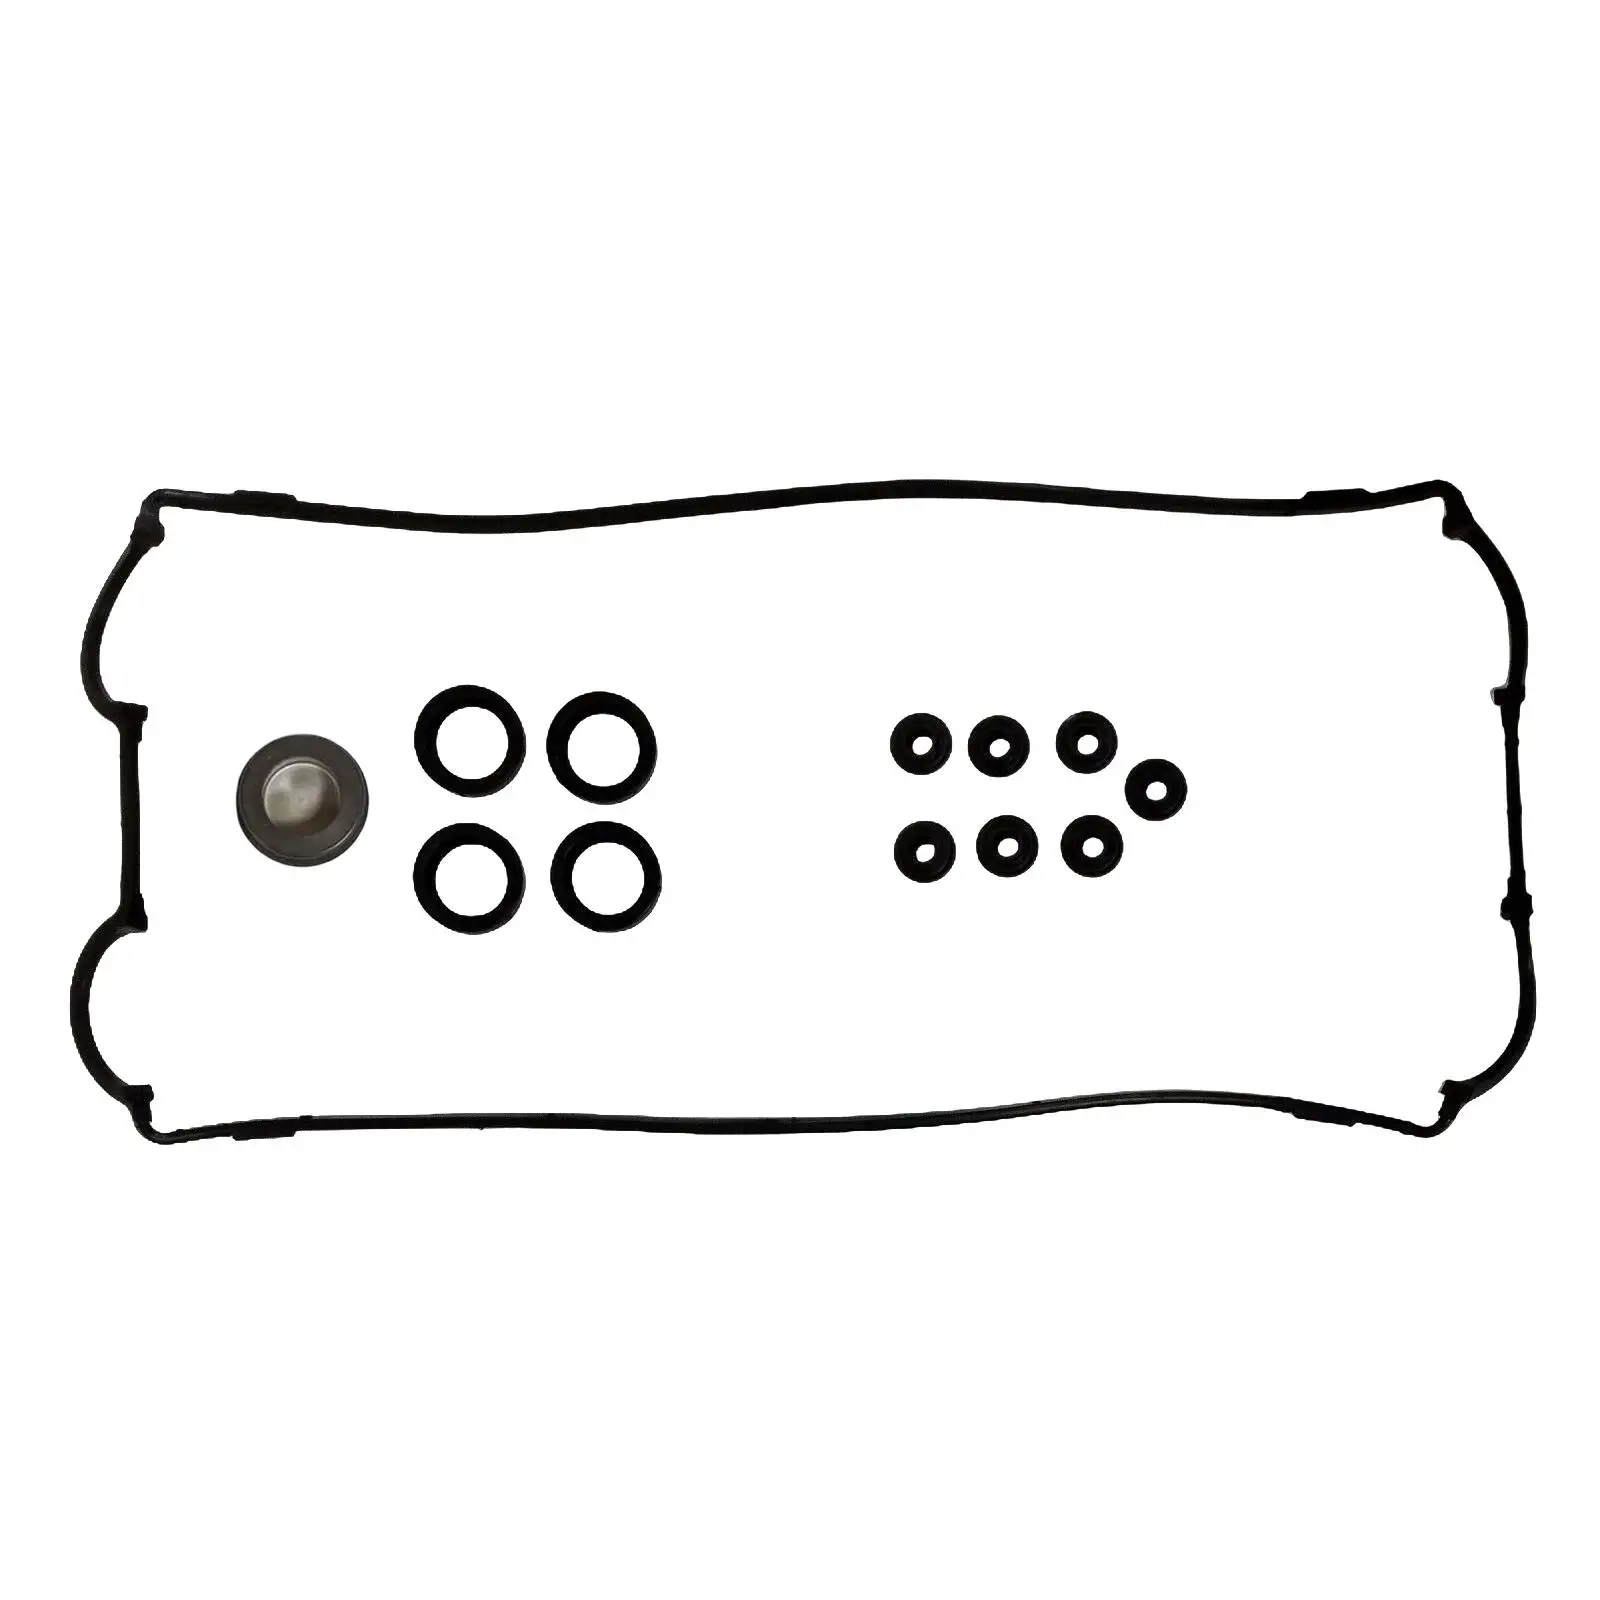 Valve Cover Gasket Replacement Spare for 2.0 B20B4 B20Z2